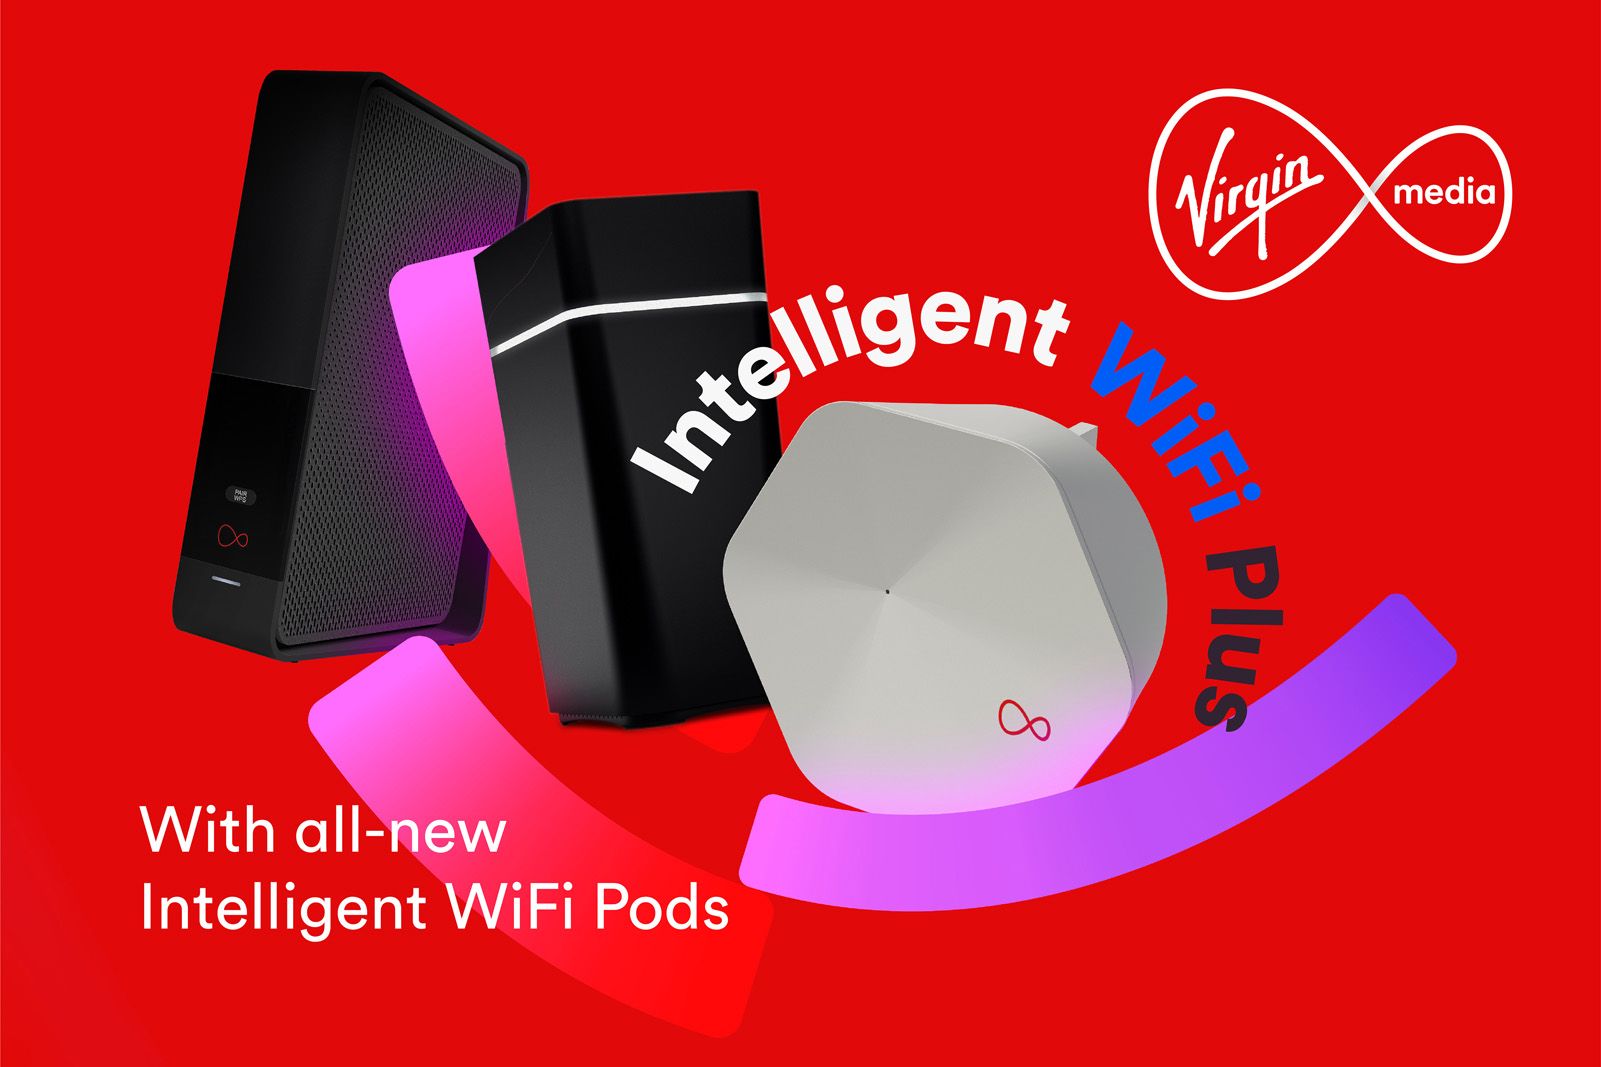 Virgin Intelligent WiFi Plus offers mesh Wi-Fi to boost your home network photo 1